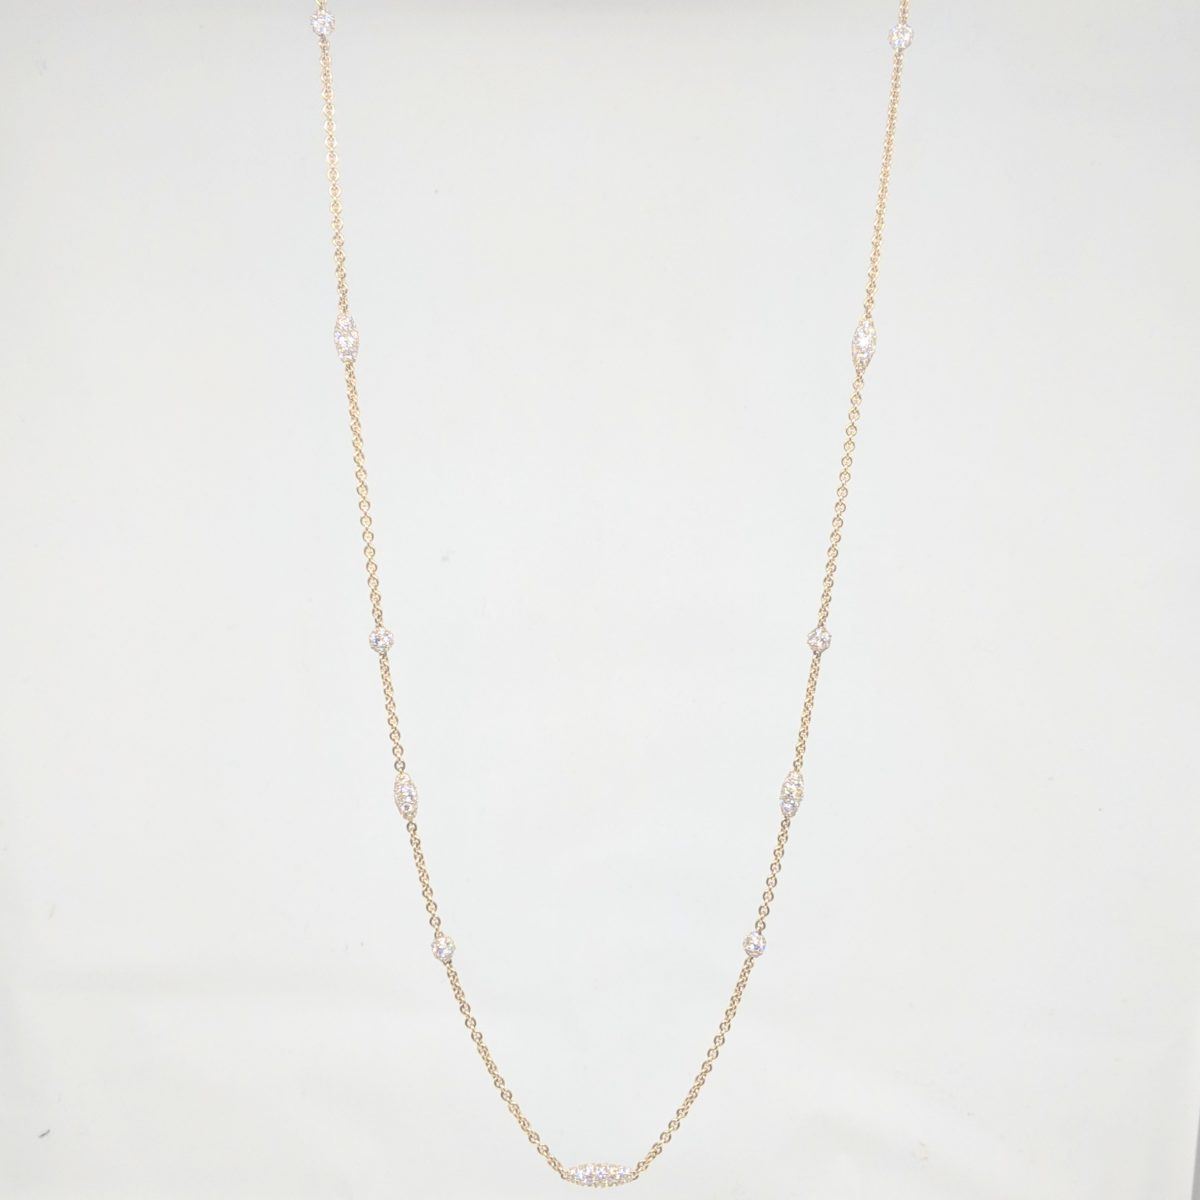 Yellow Gold and Diamond Pipette Necklace, 36"